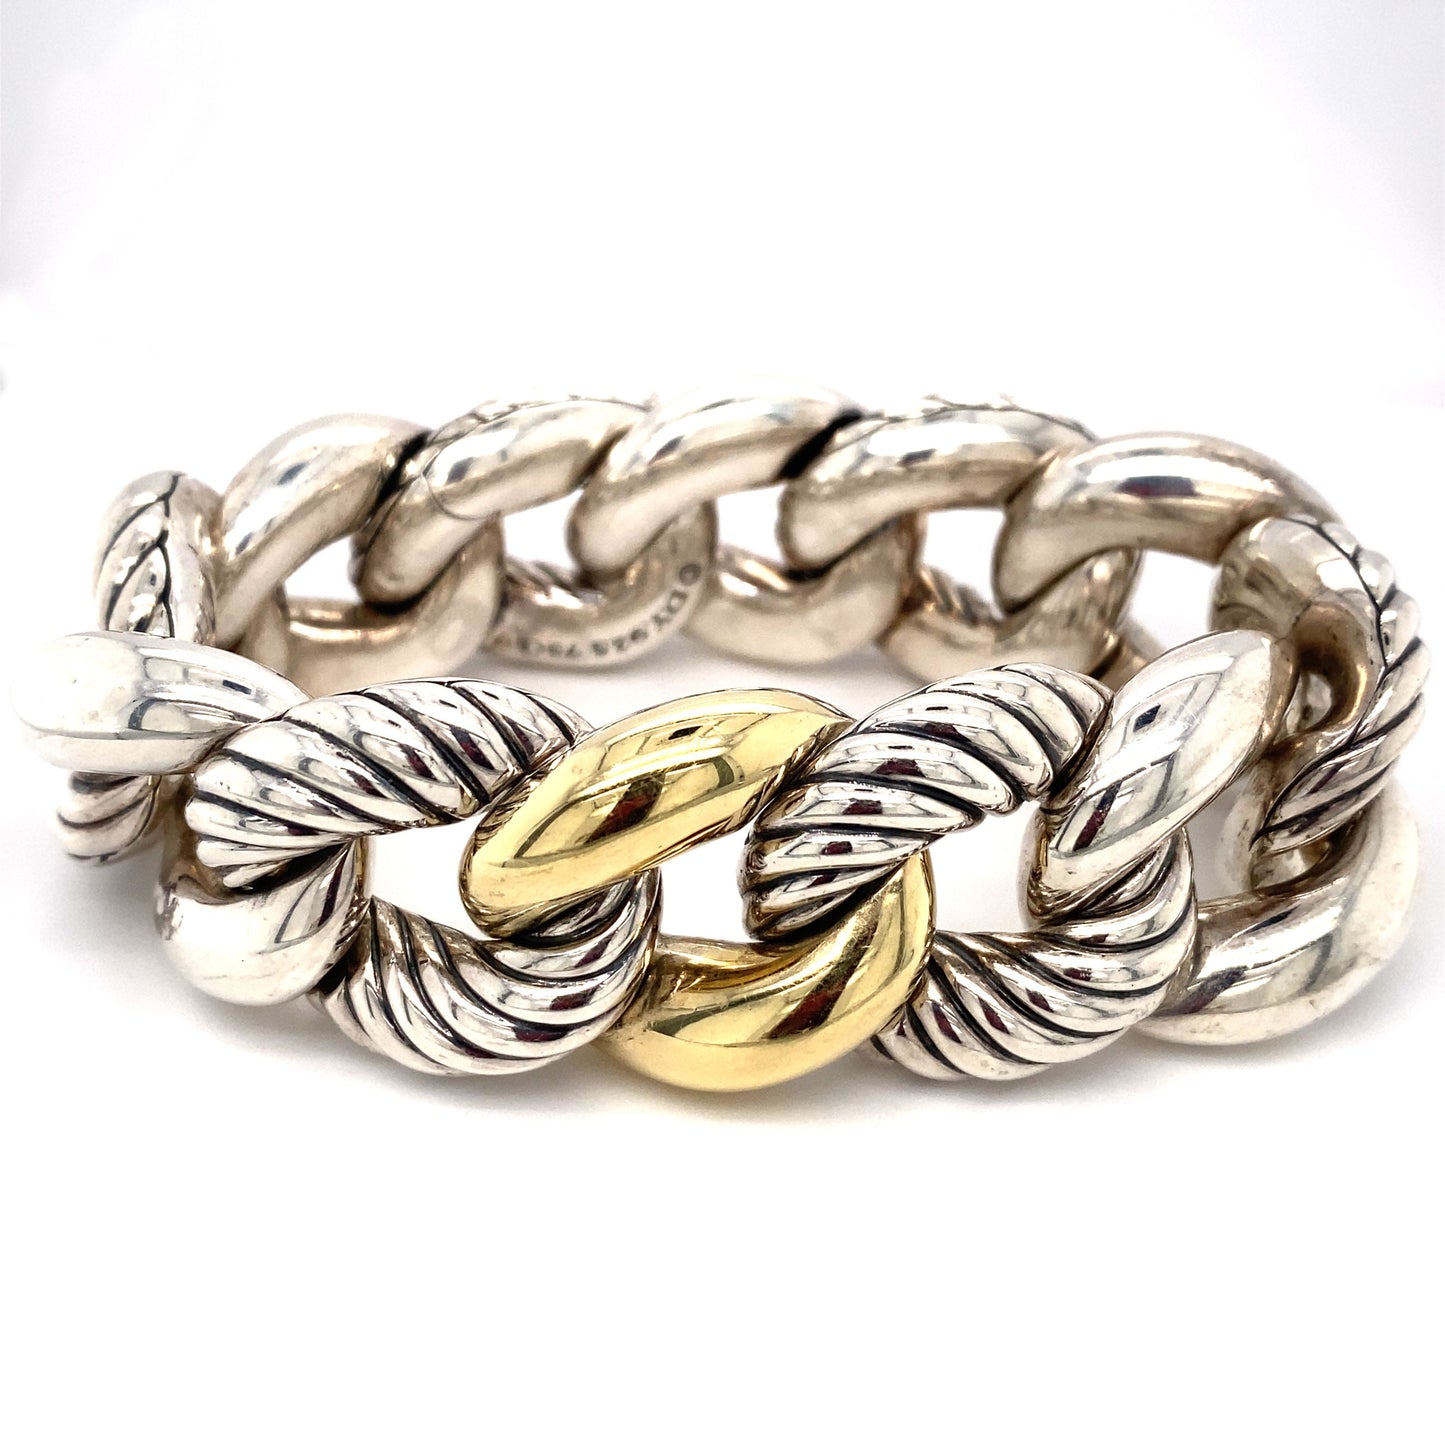 David Yurman Large Curb Link Chain Bracelet in Sterling Silver and 18K Gold